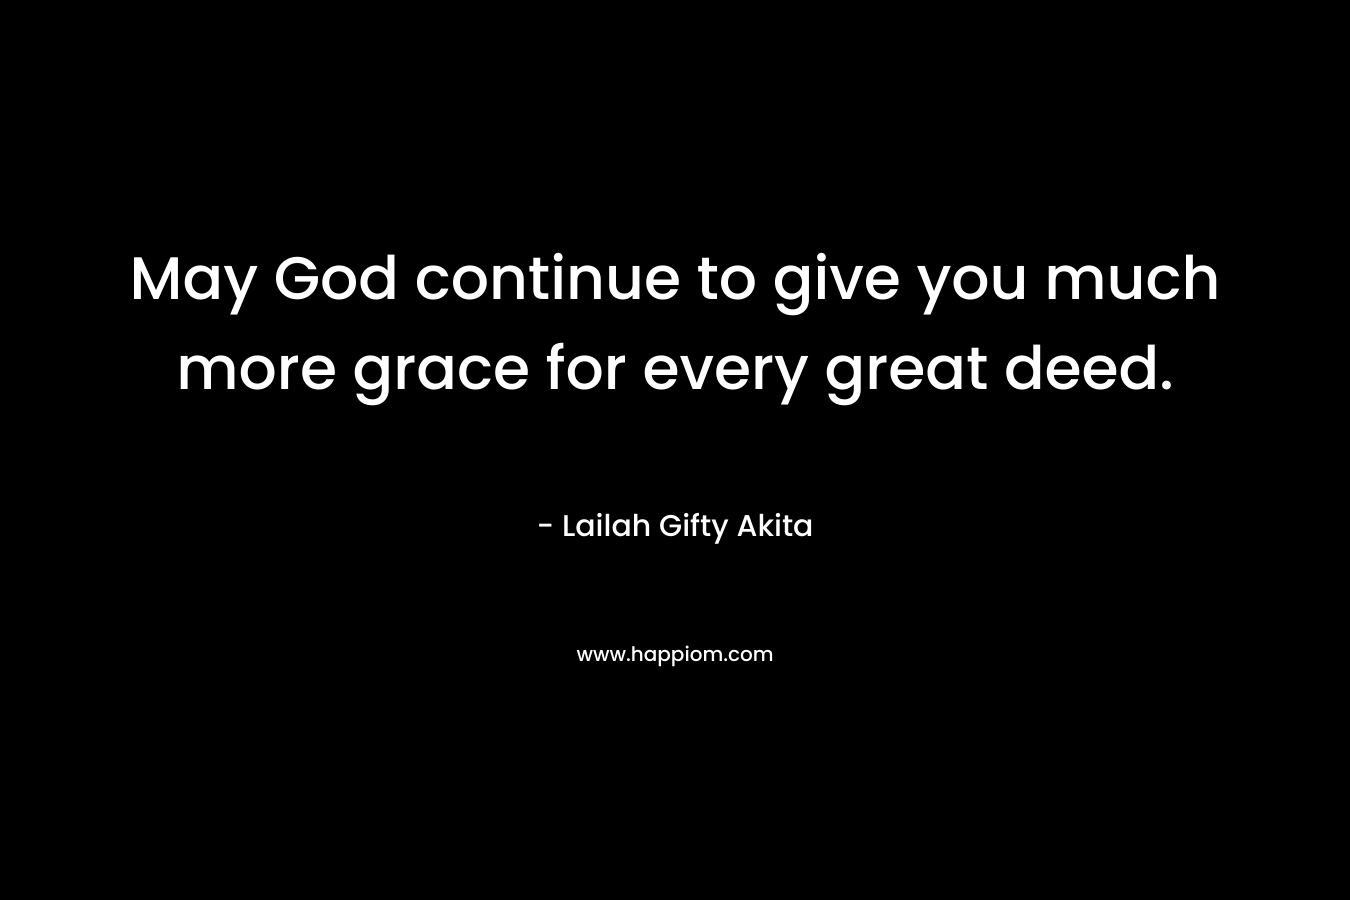 May God continue to give you much more grace for every great deed.